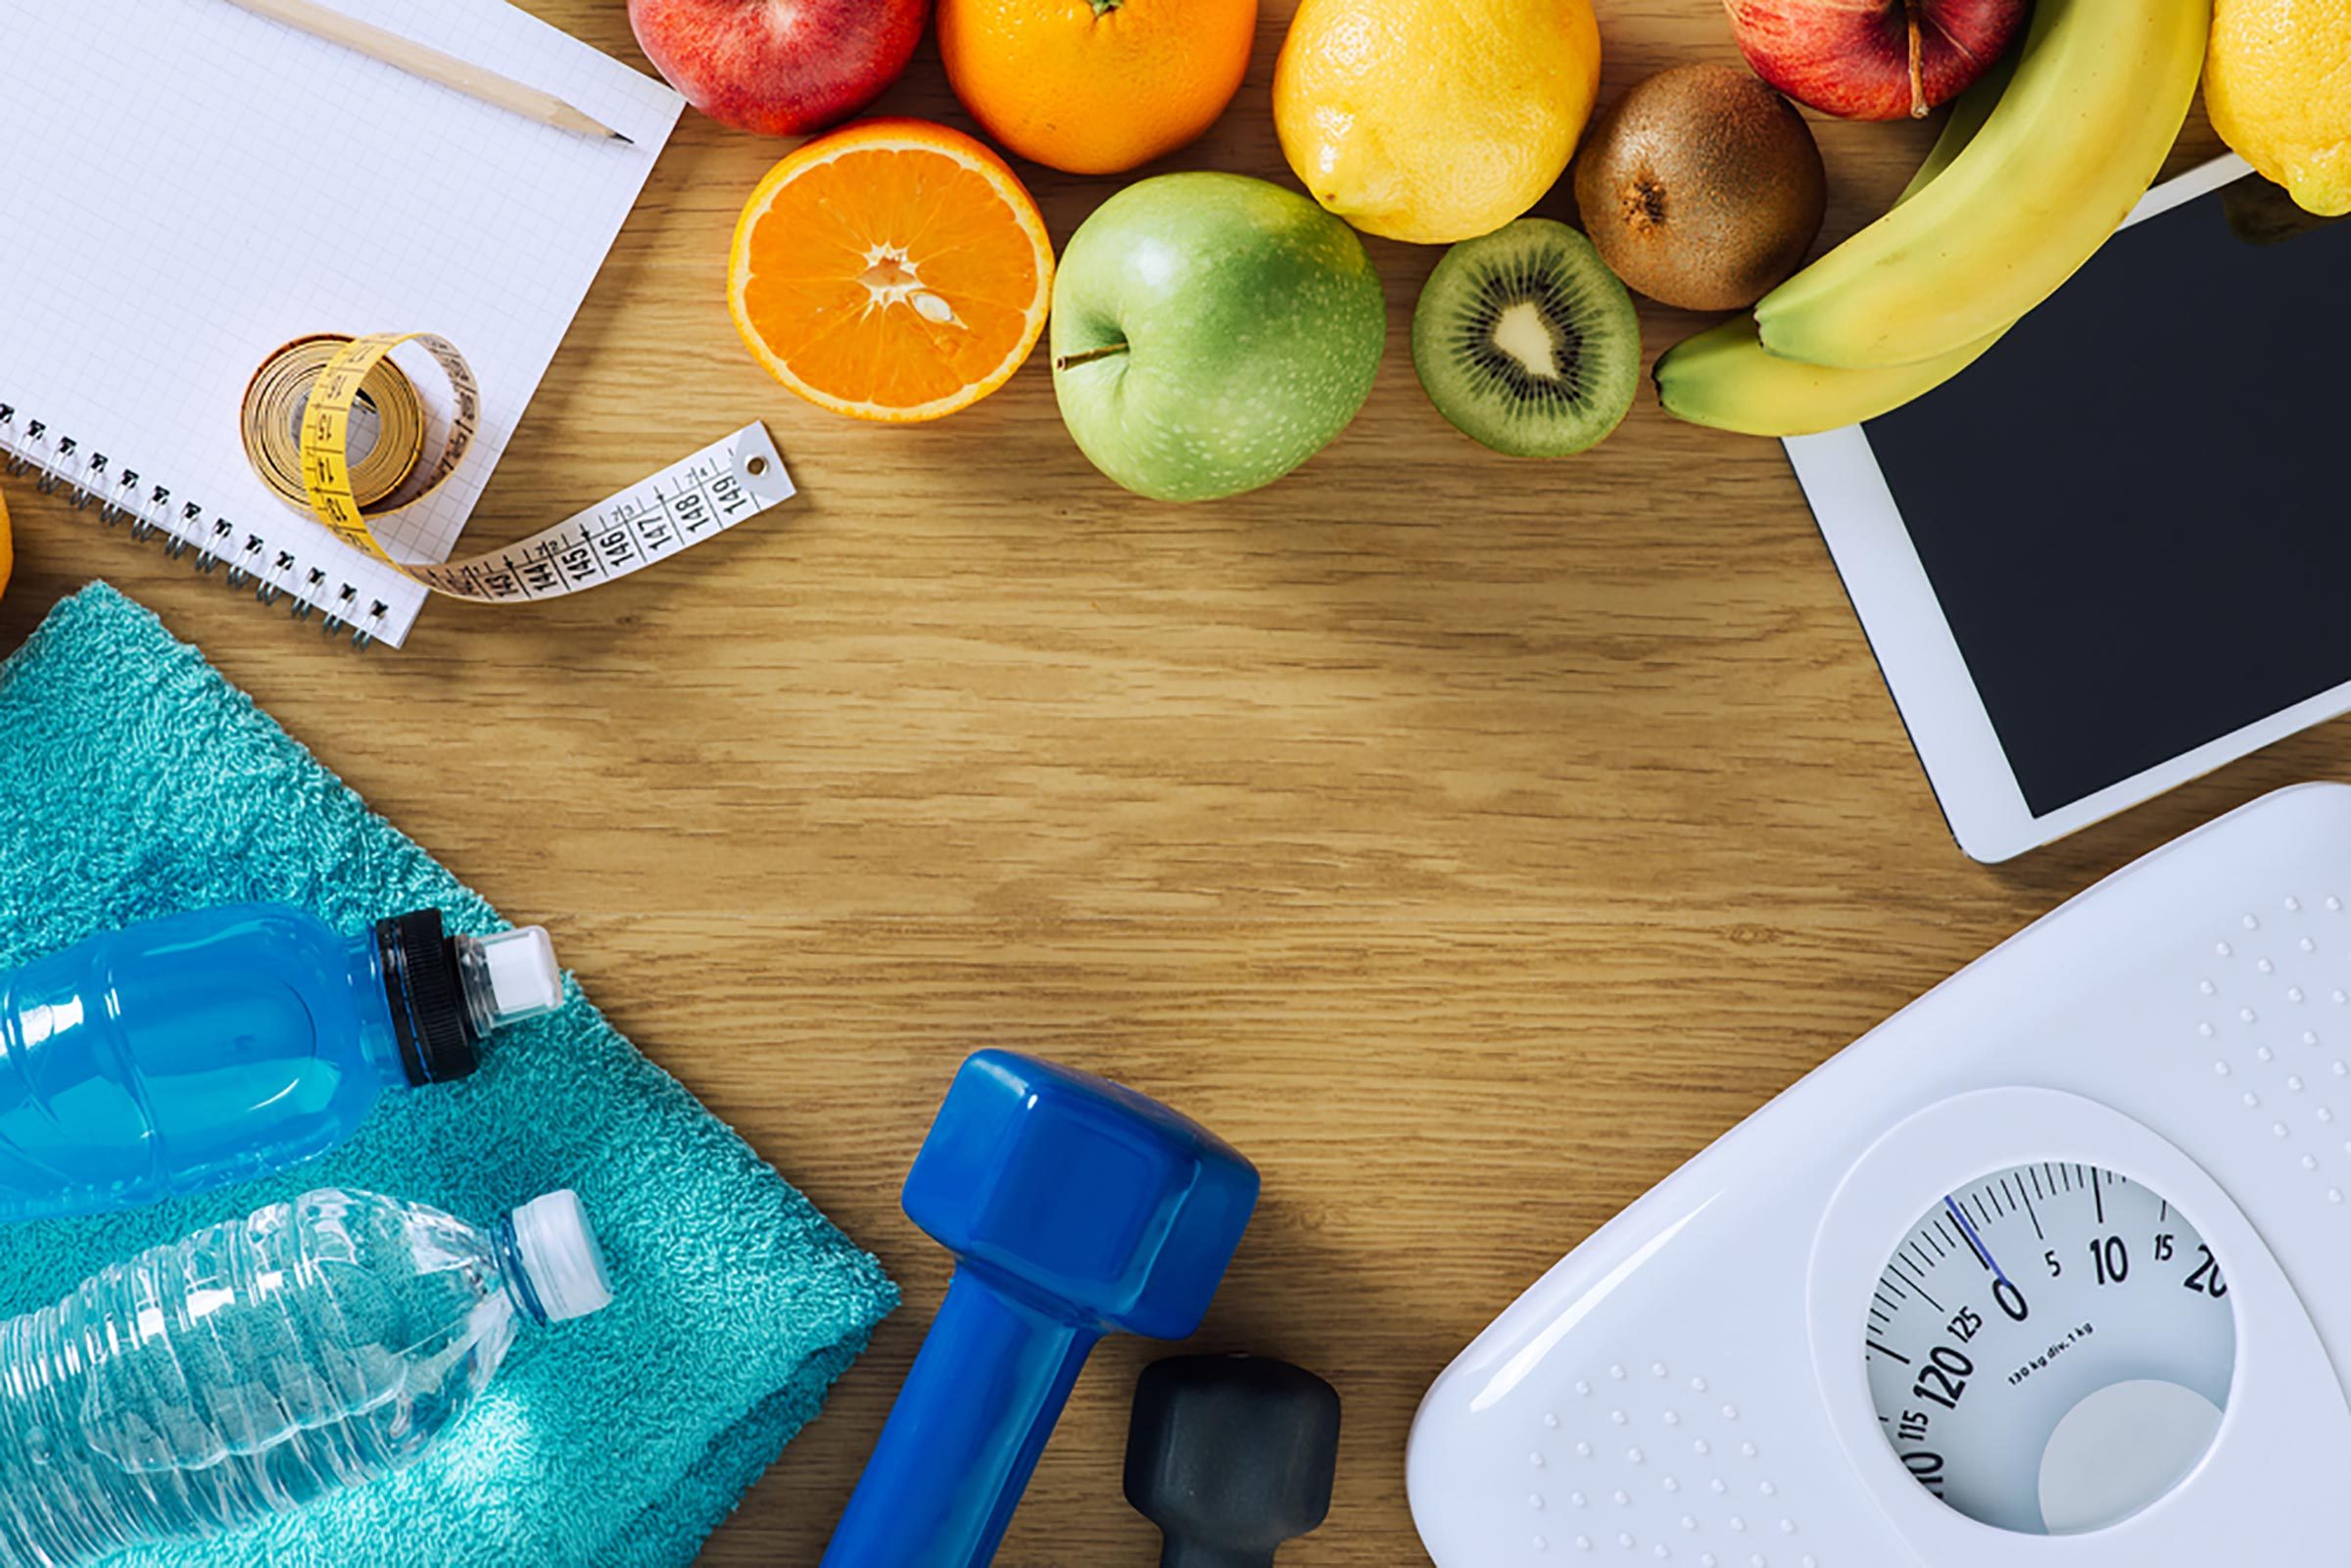 Items representing health including a scale, fruit, a free weight and a water bottle